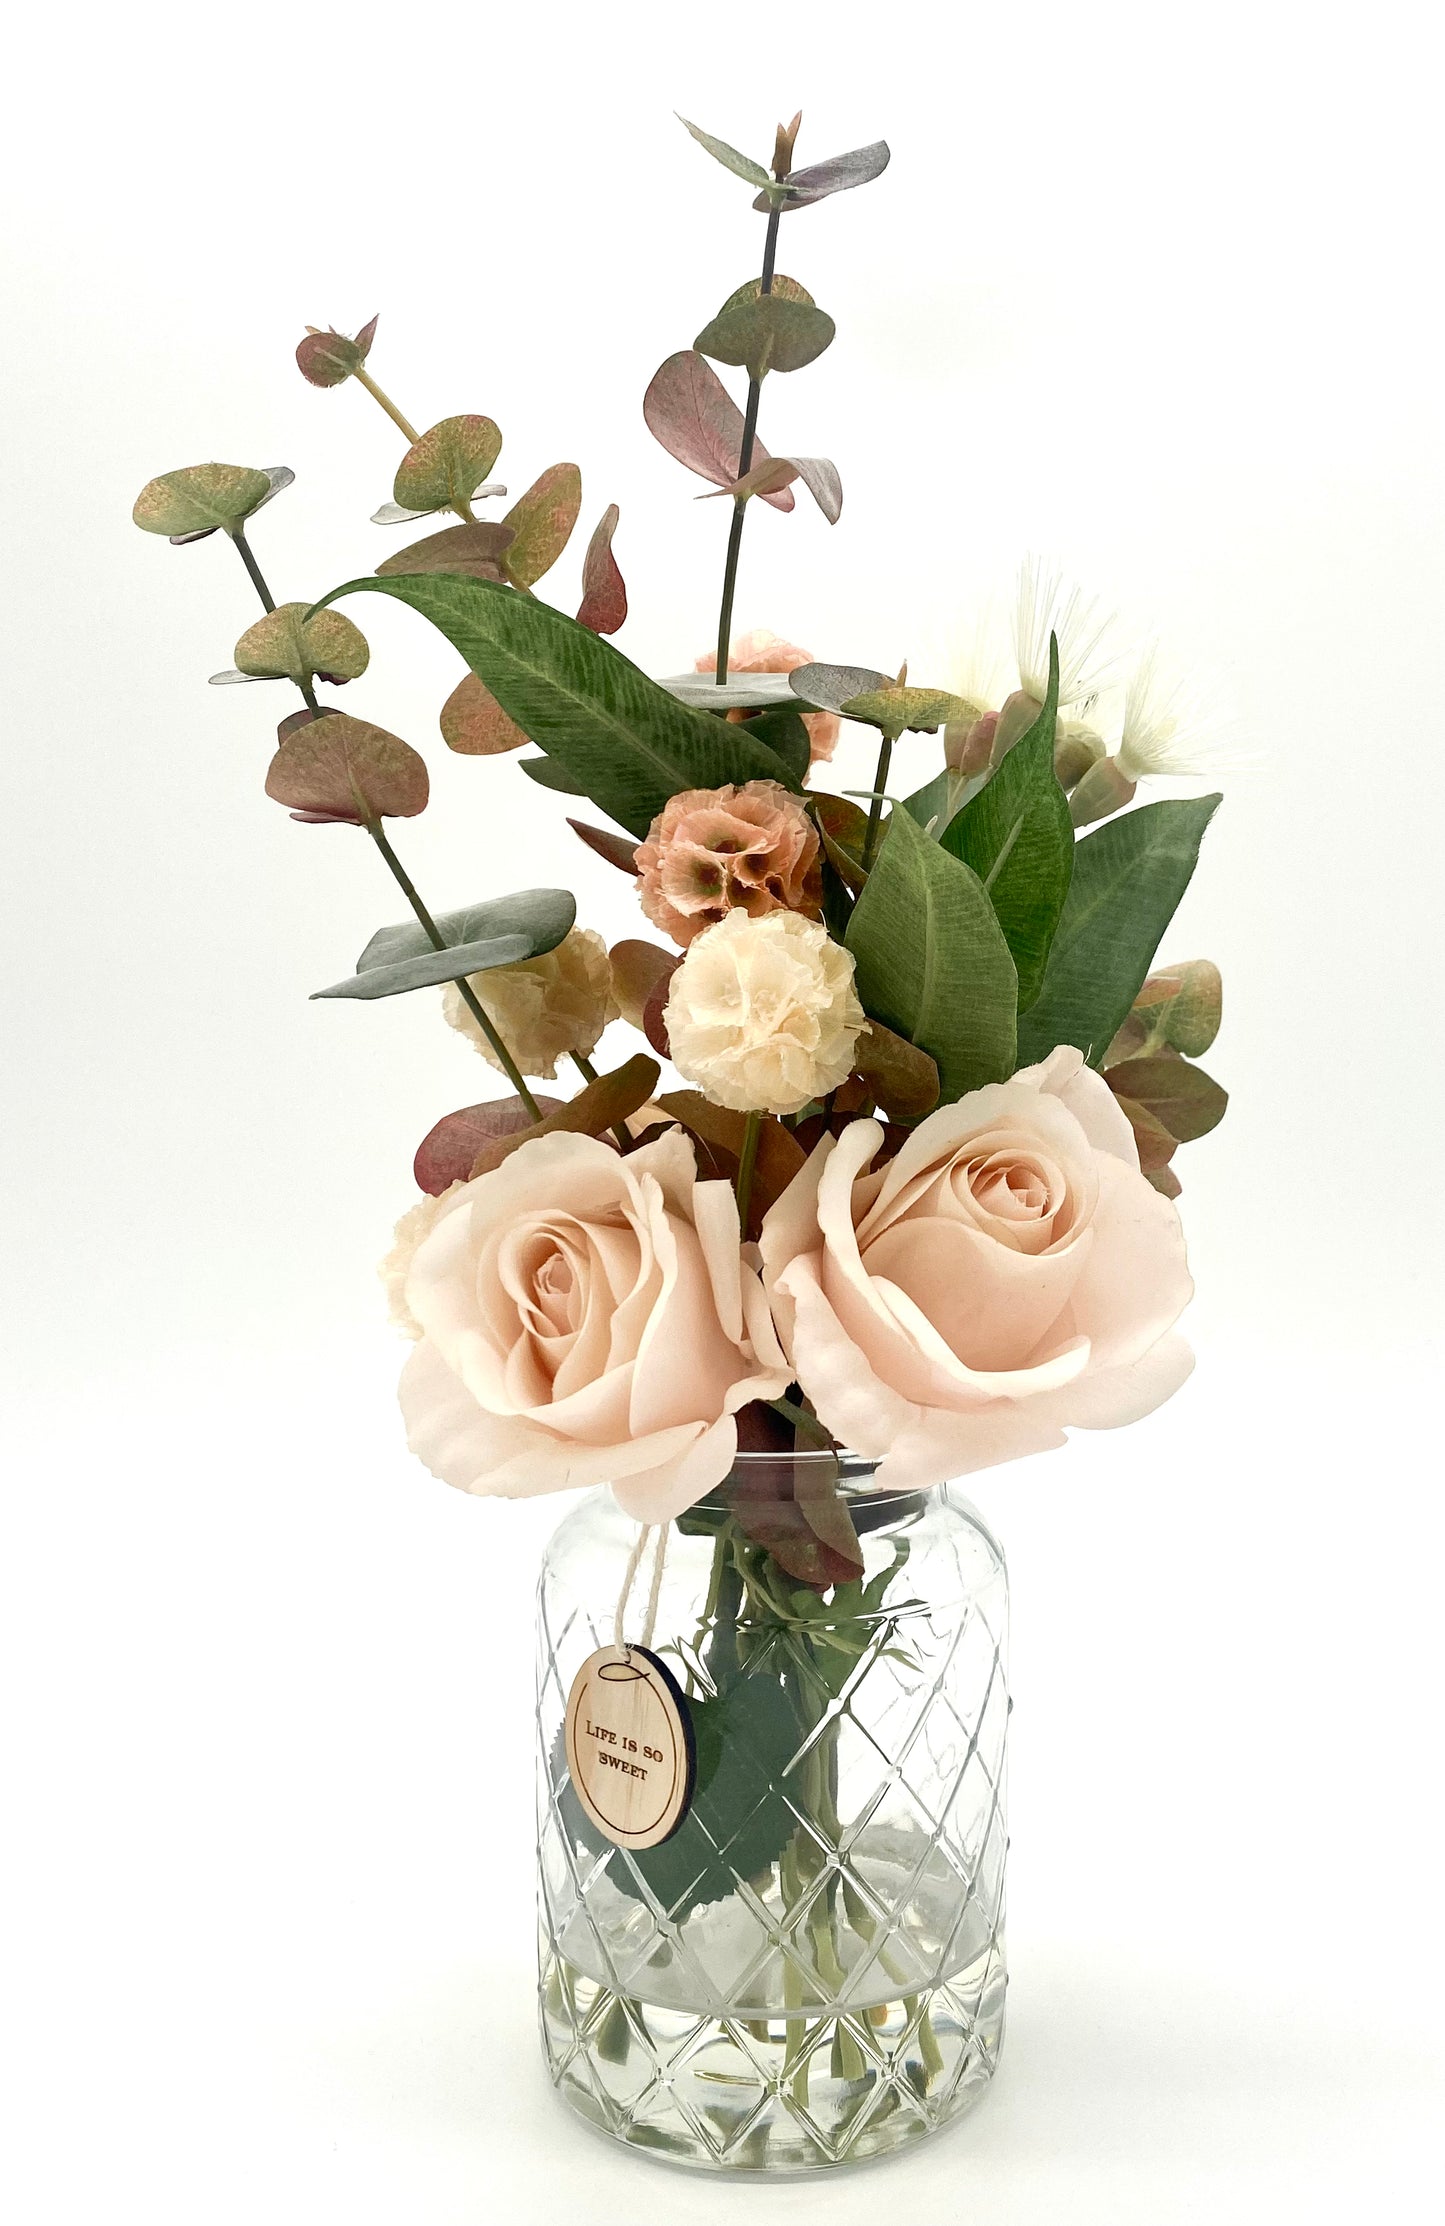 The Vintage Rose One: Realistic Soft Pink Roses in a Sweet Vintage Style Vase